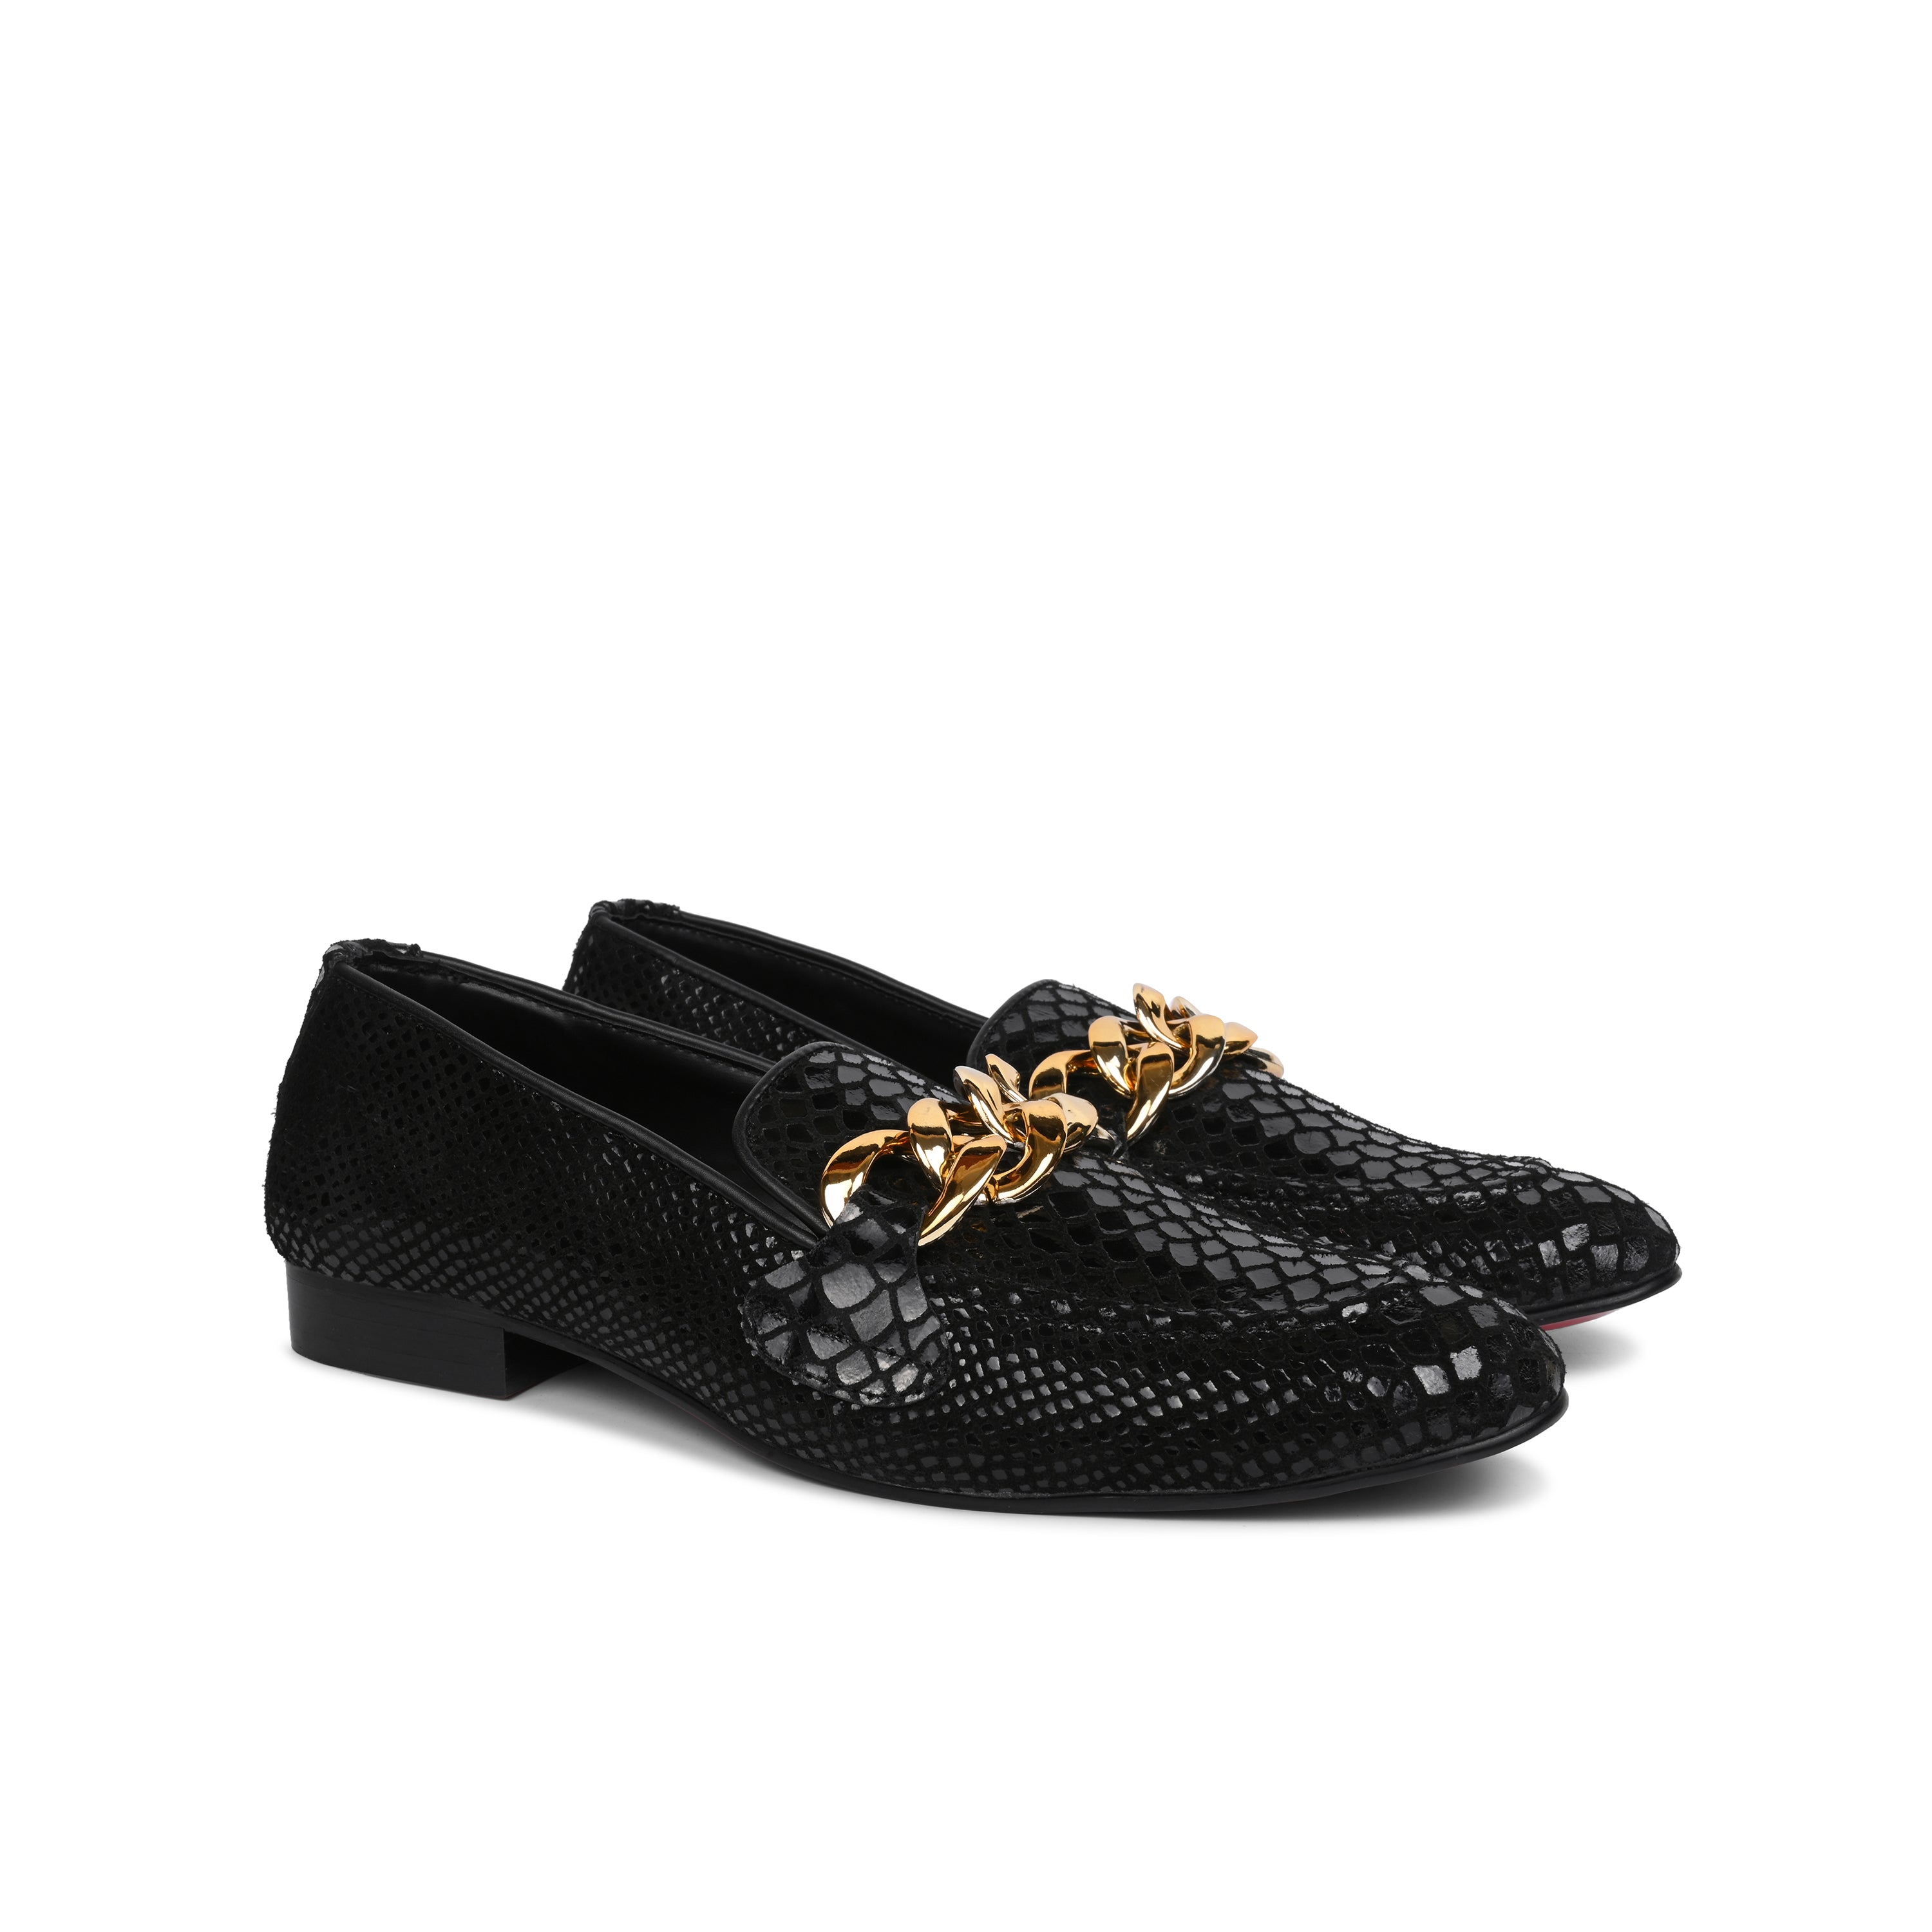 Will Lam Loafers